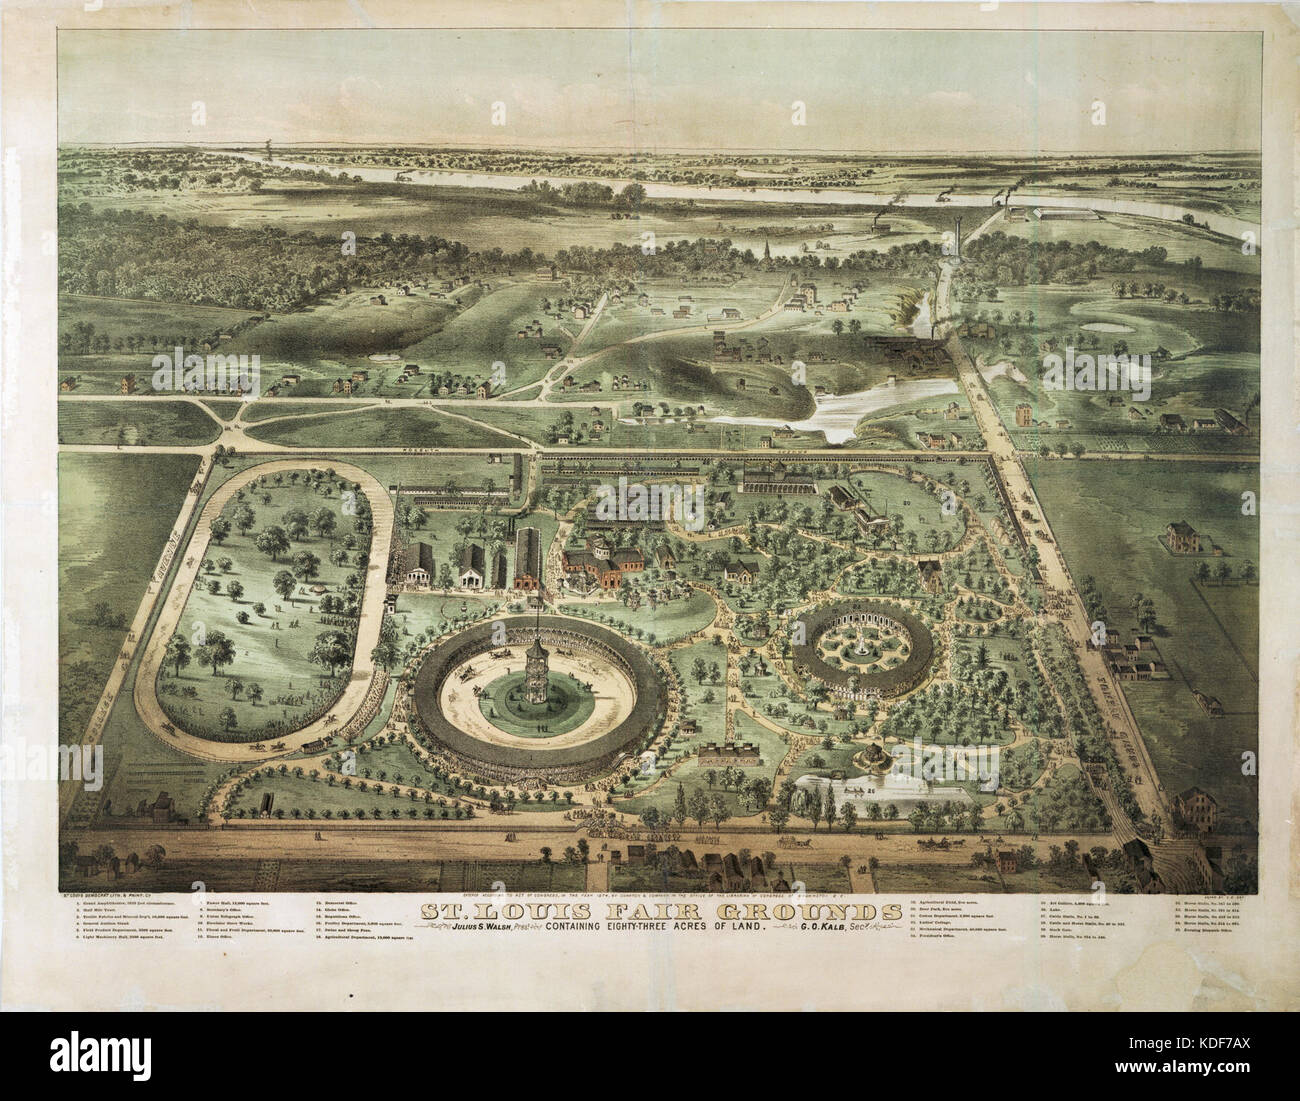 St. Louis Fair Grounds. Containing Eighty Three Acres of Land Stock Photo